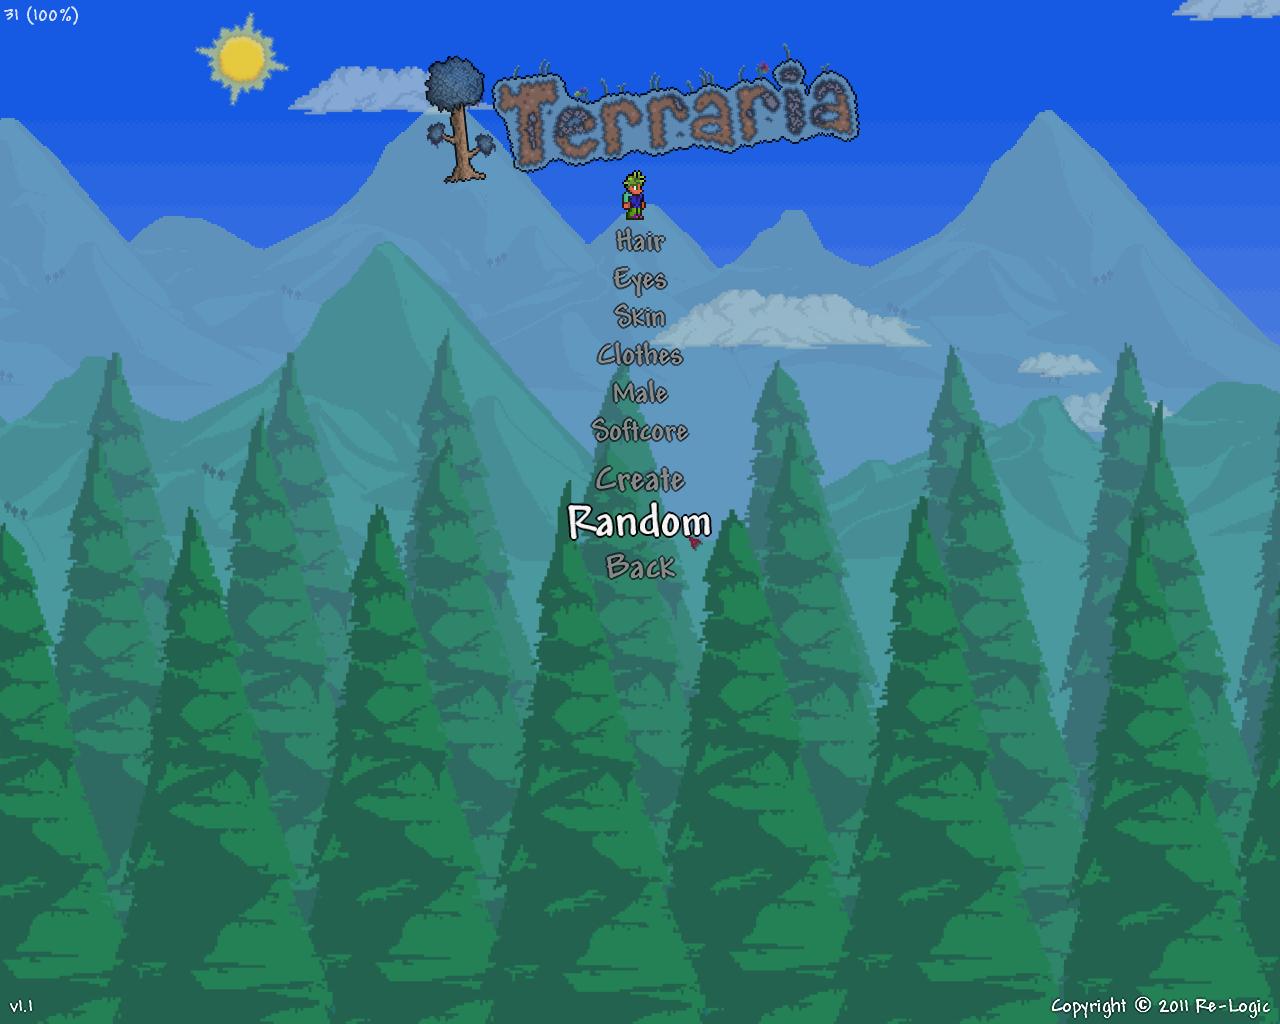 terraria-stuck-on-found-server-when-joining